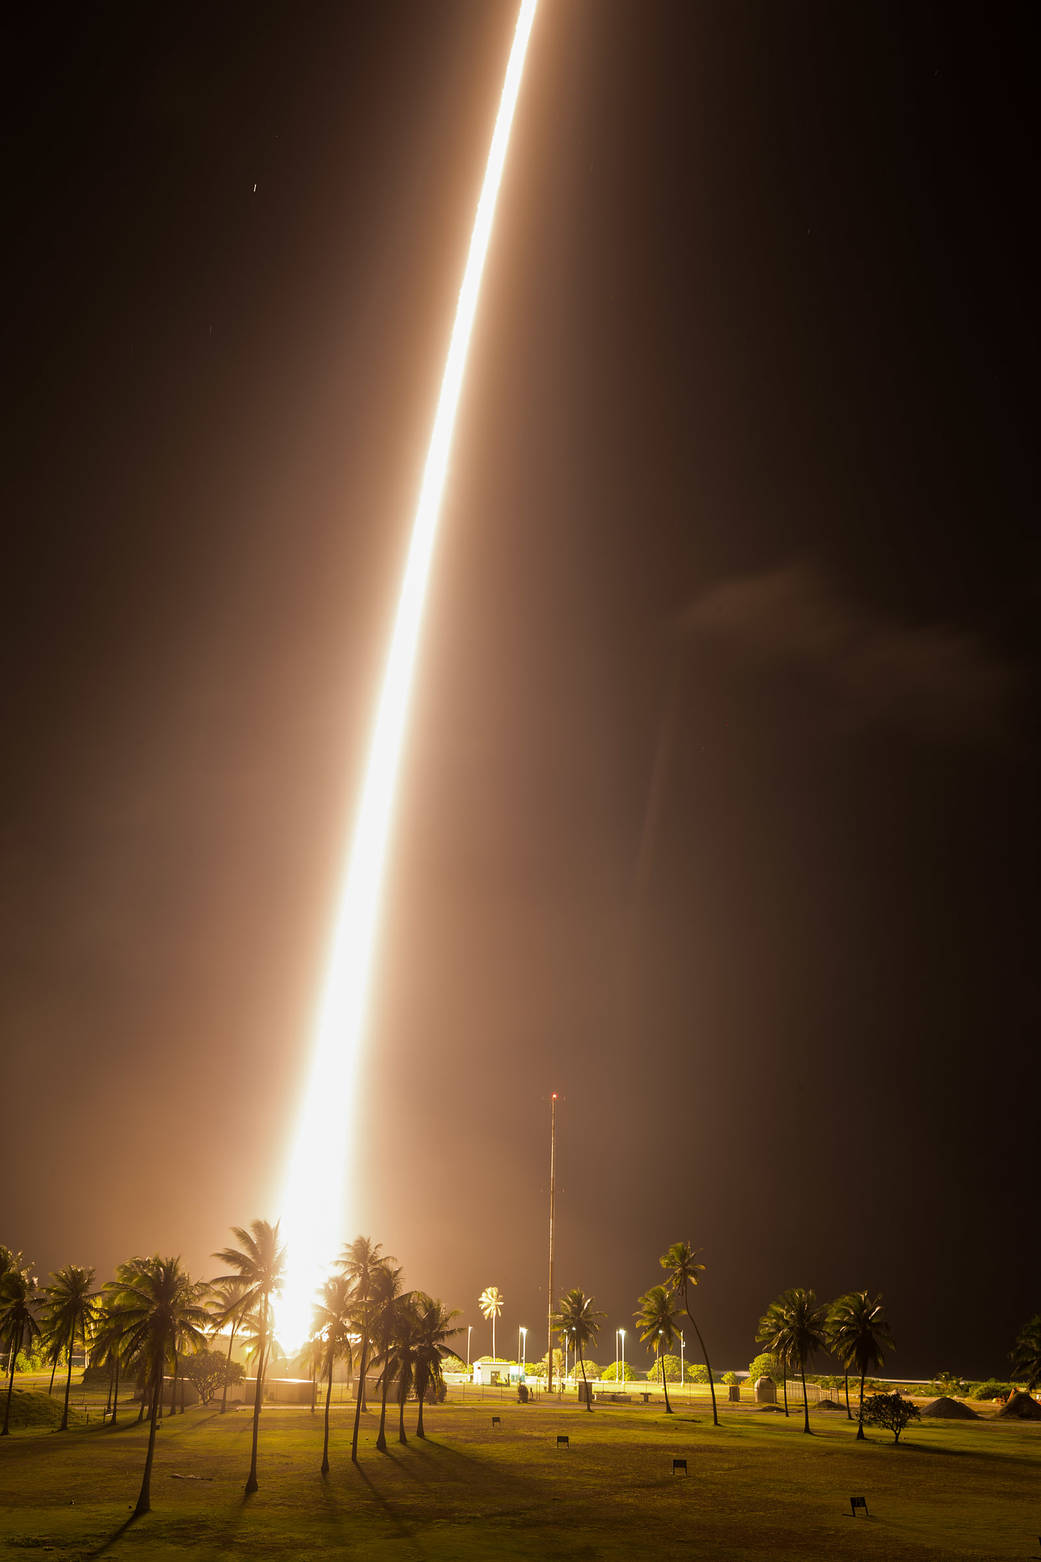 A long-exposure photo of a sounding rocket represented by a white streak, taken during the night with the landscape of green grass and palm trees lit up.